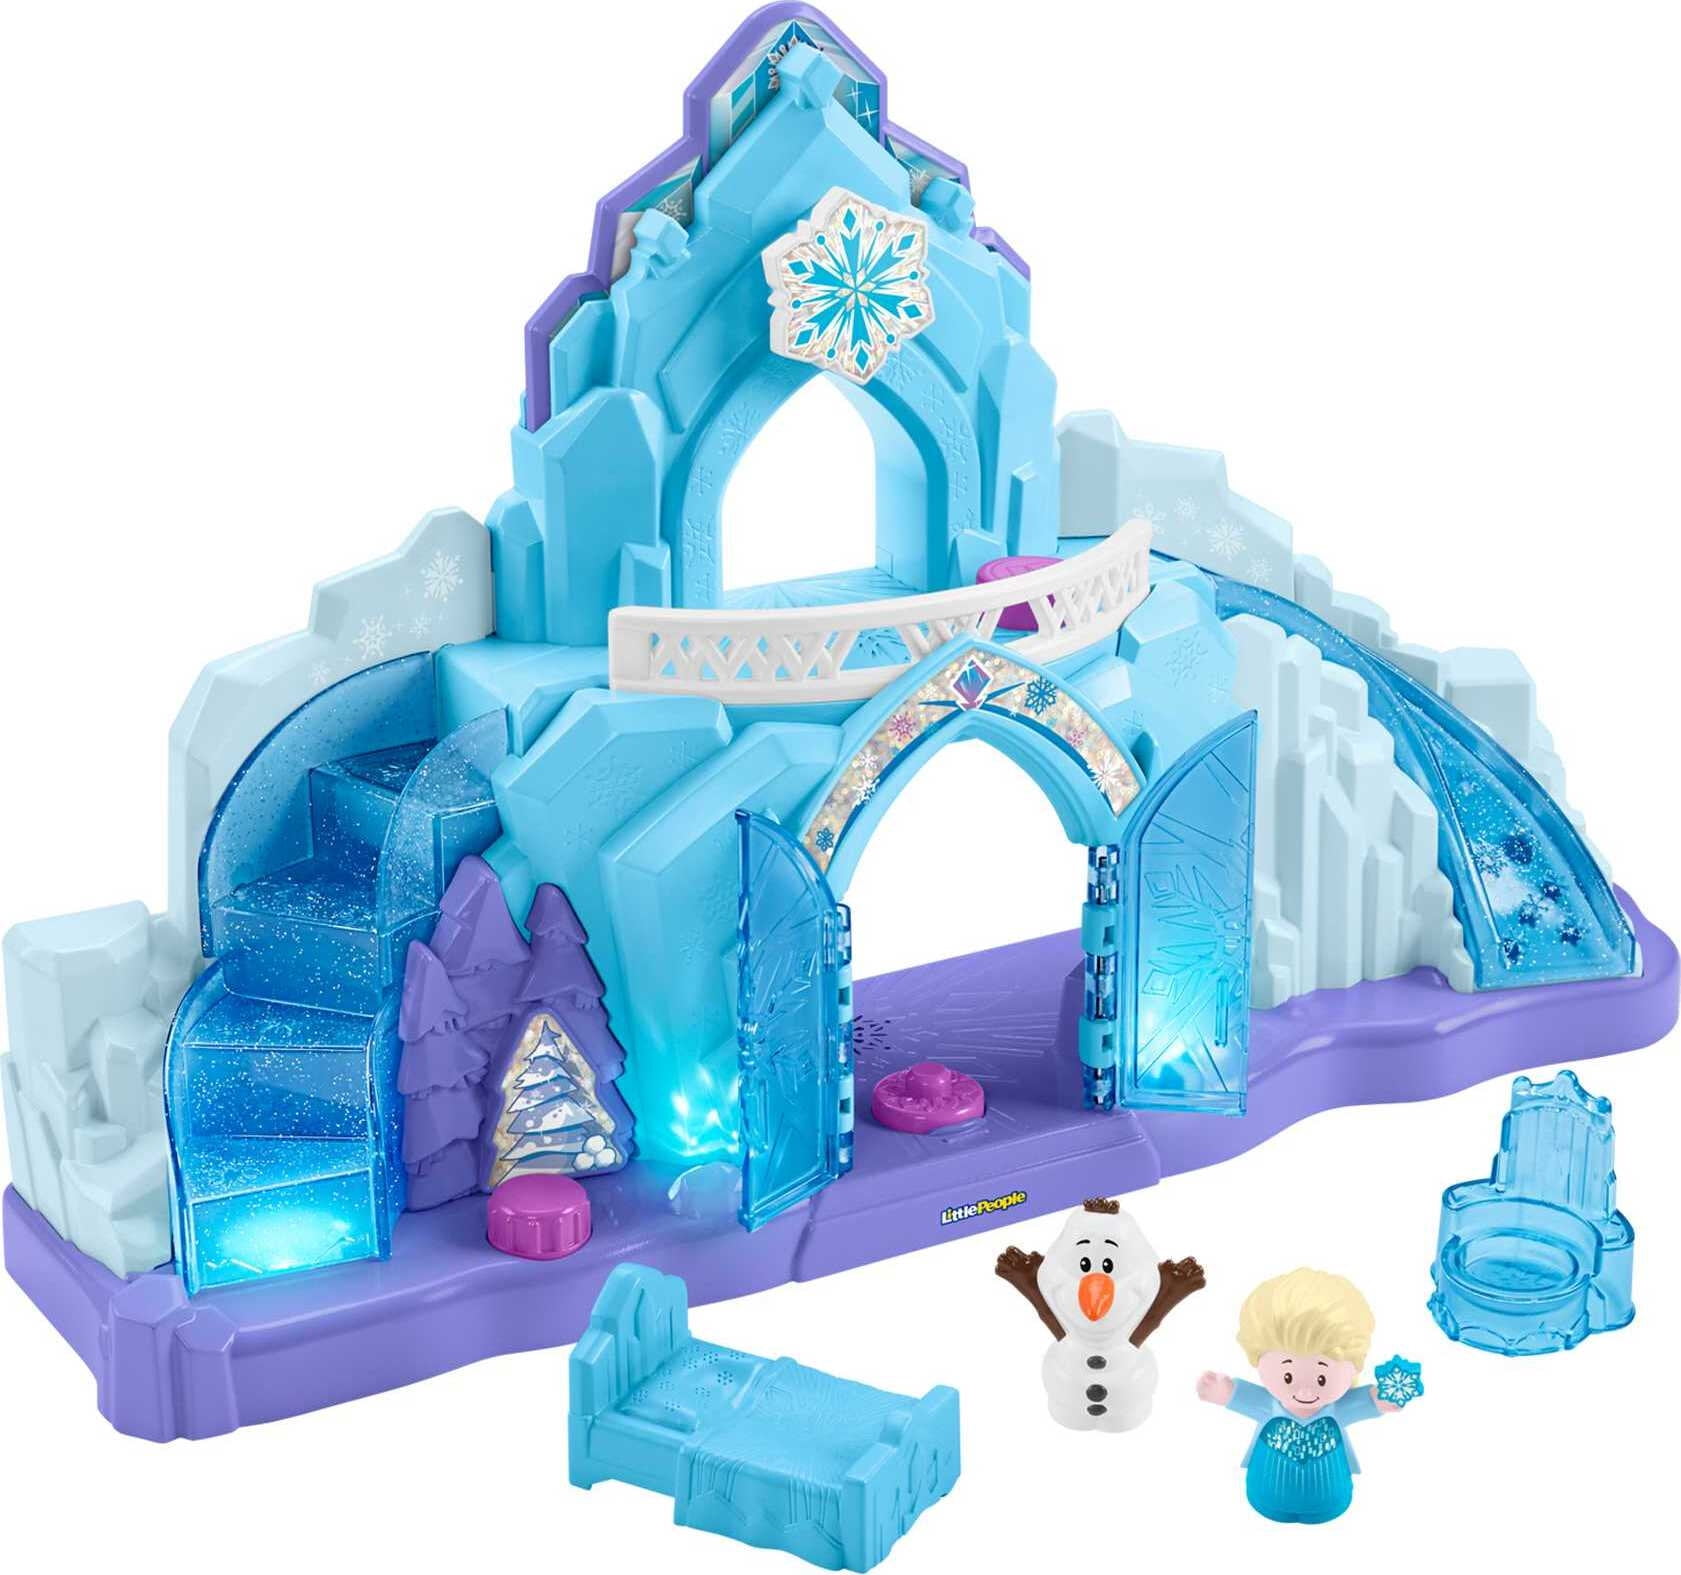 Disney Frozen Kristoff's Sleigh by Little People New toys toy  2019 